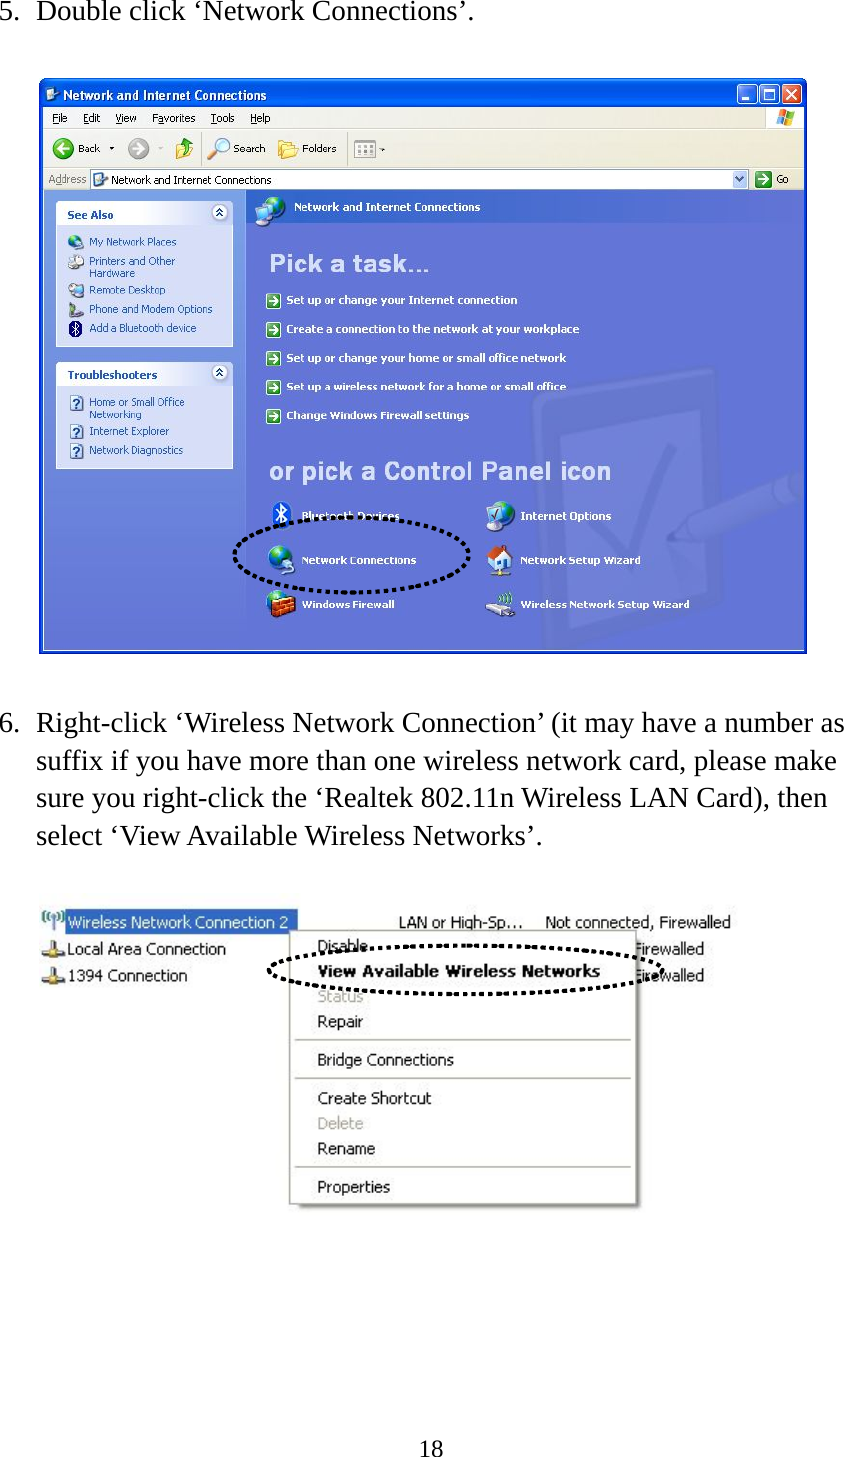 18  5. Double click ‘Network Connections’.    6. Right-click ‘Wireless Network Connection’ (it may have a number as suffix if you have more than one wireless network card, please make sure you right-click the ‘Realtek 802.11n Wireless LAN Card), then select ‘View Available Wireless Networks’.     